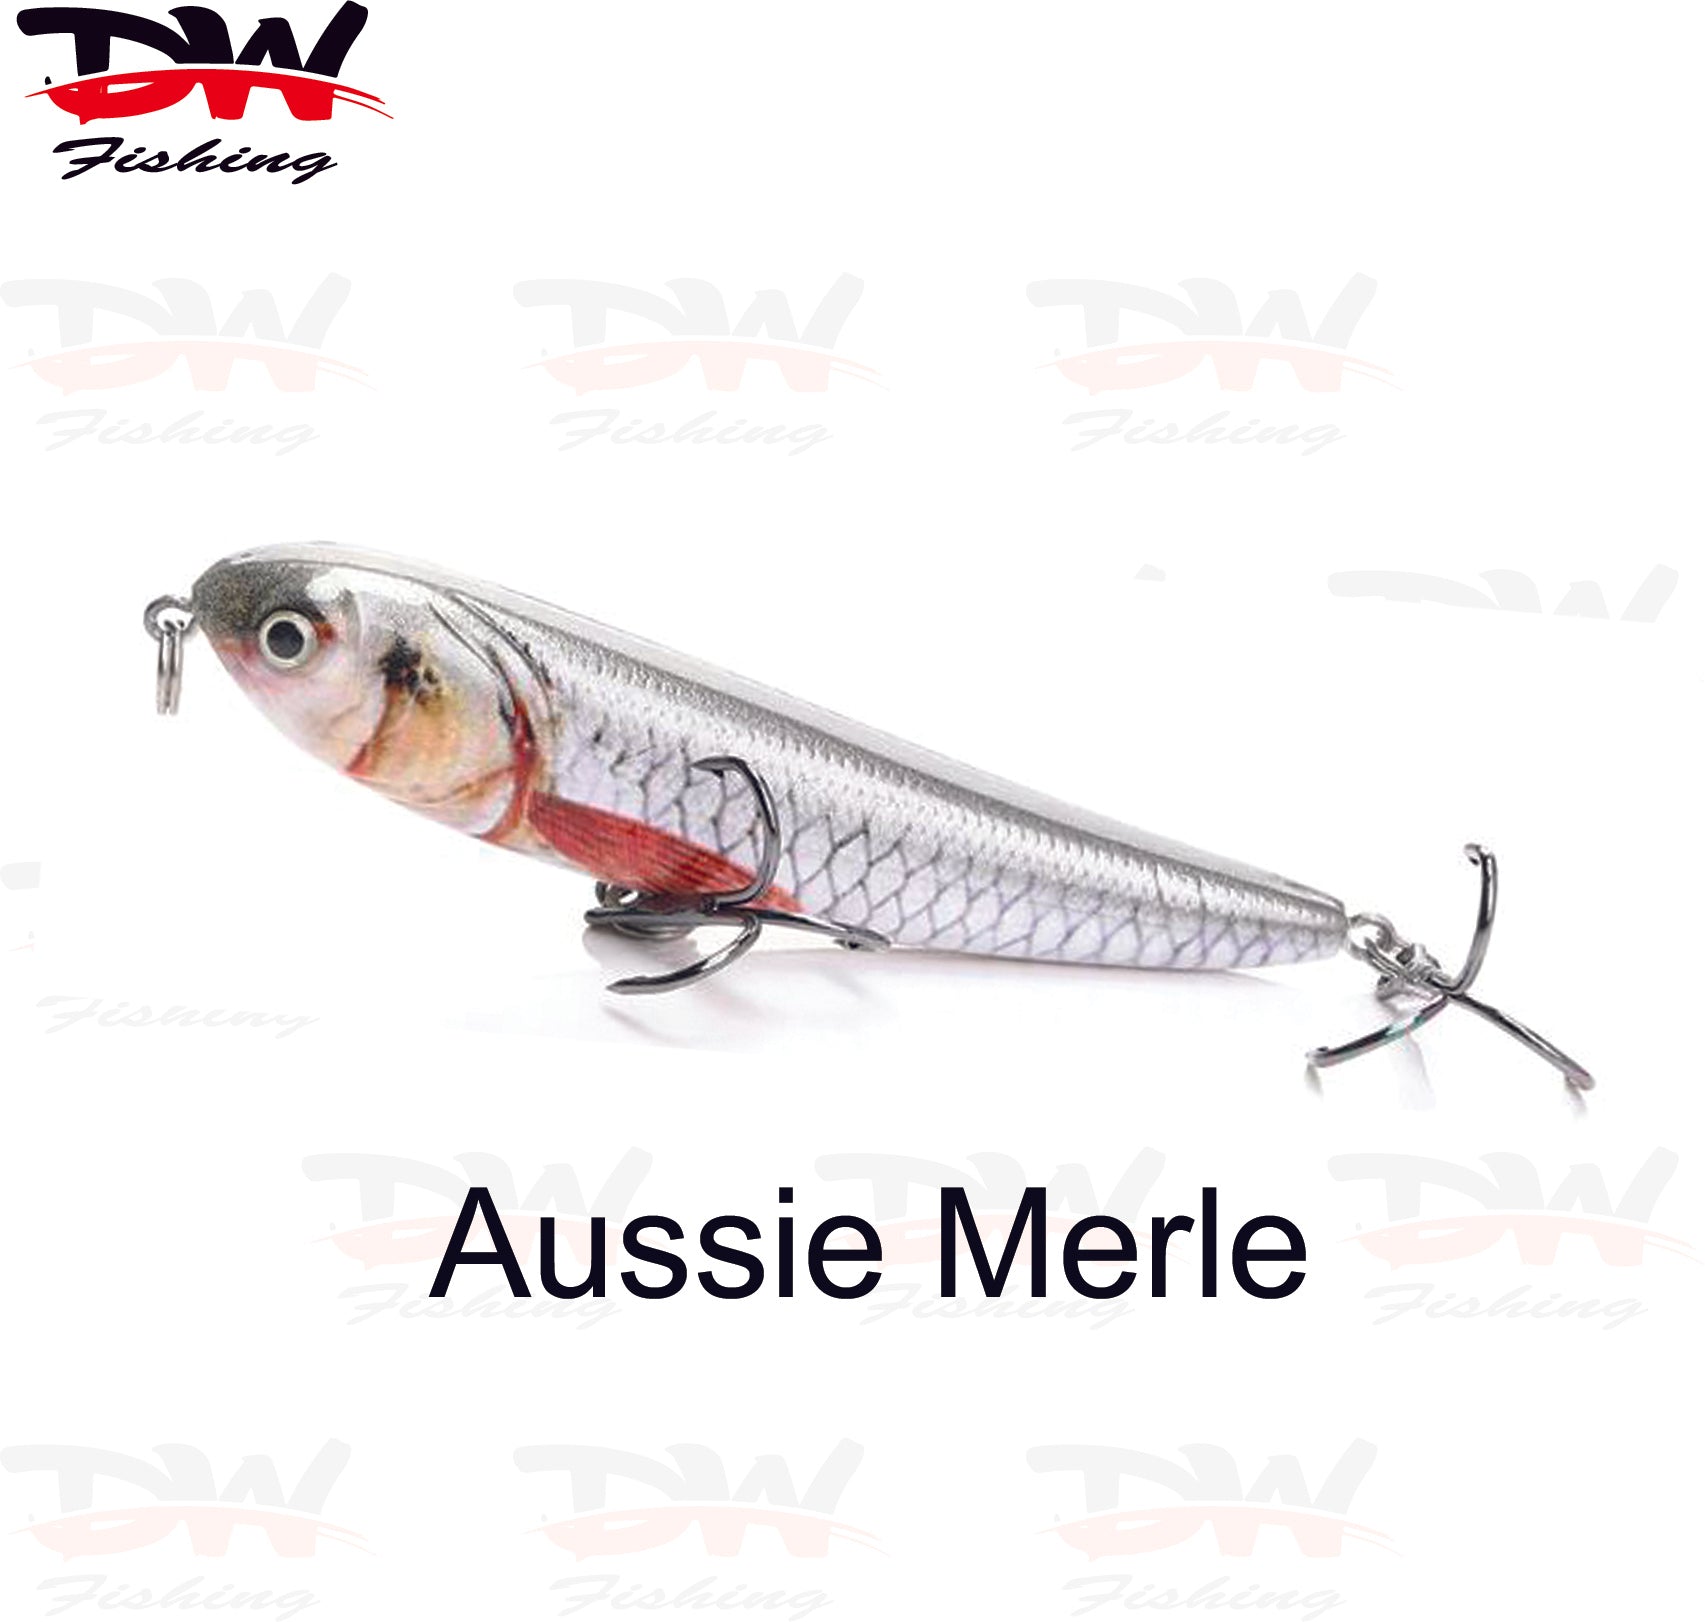 Walk the dog surface lure Aussie dog topwater 70mm single lure Aussie Merle is the colour name